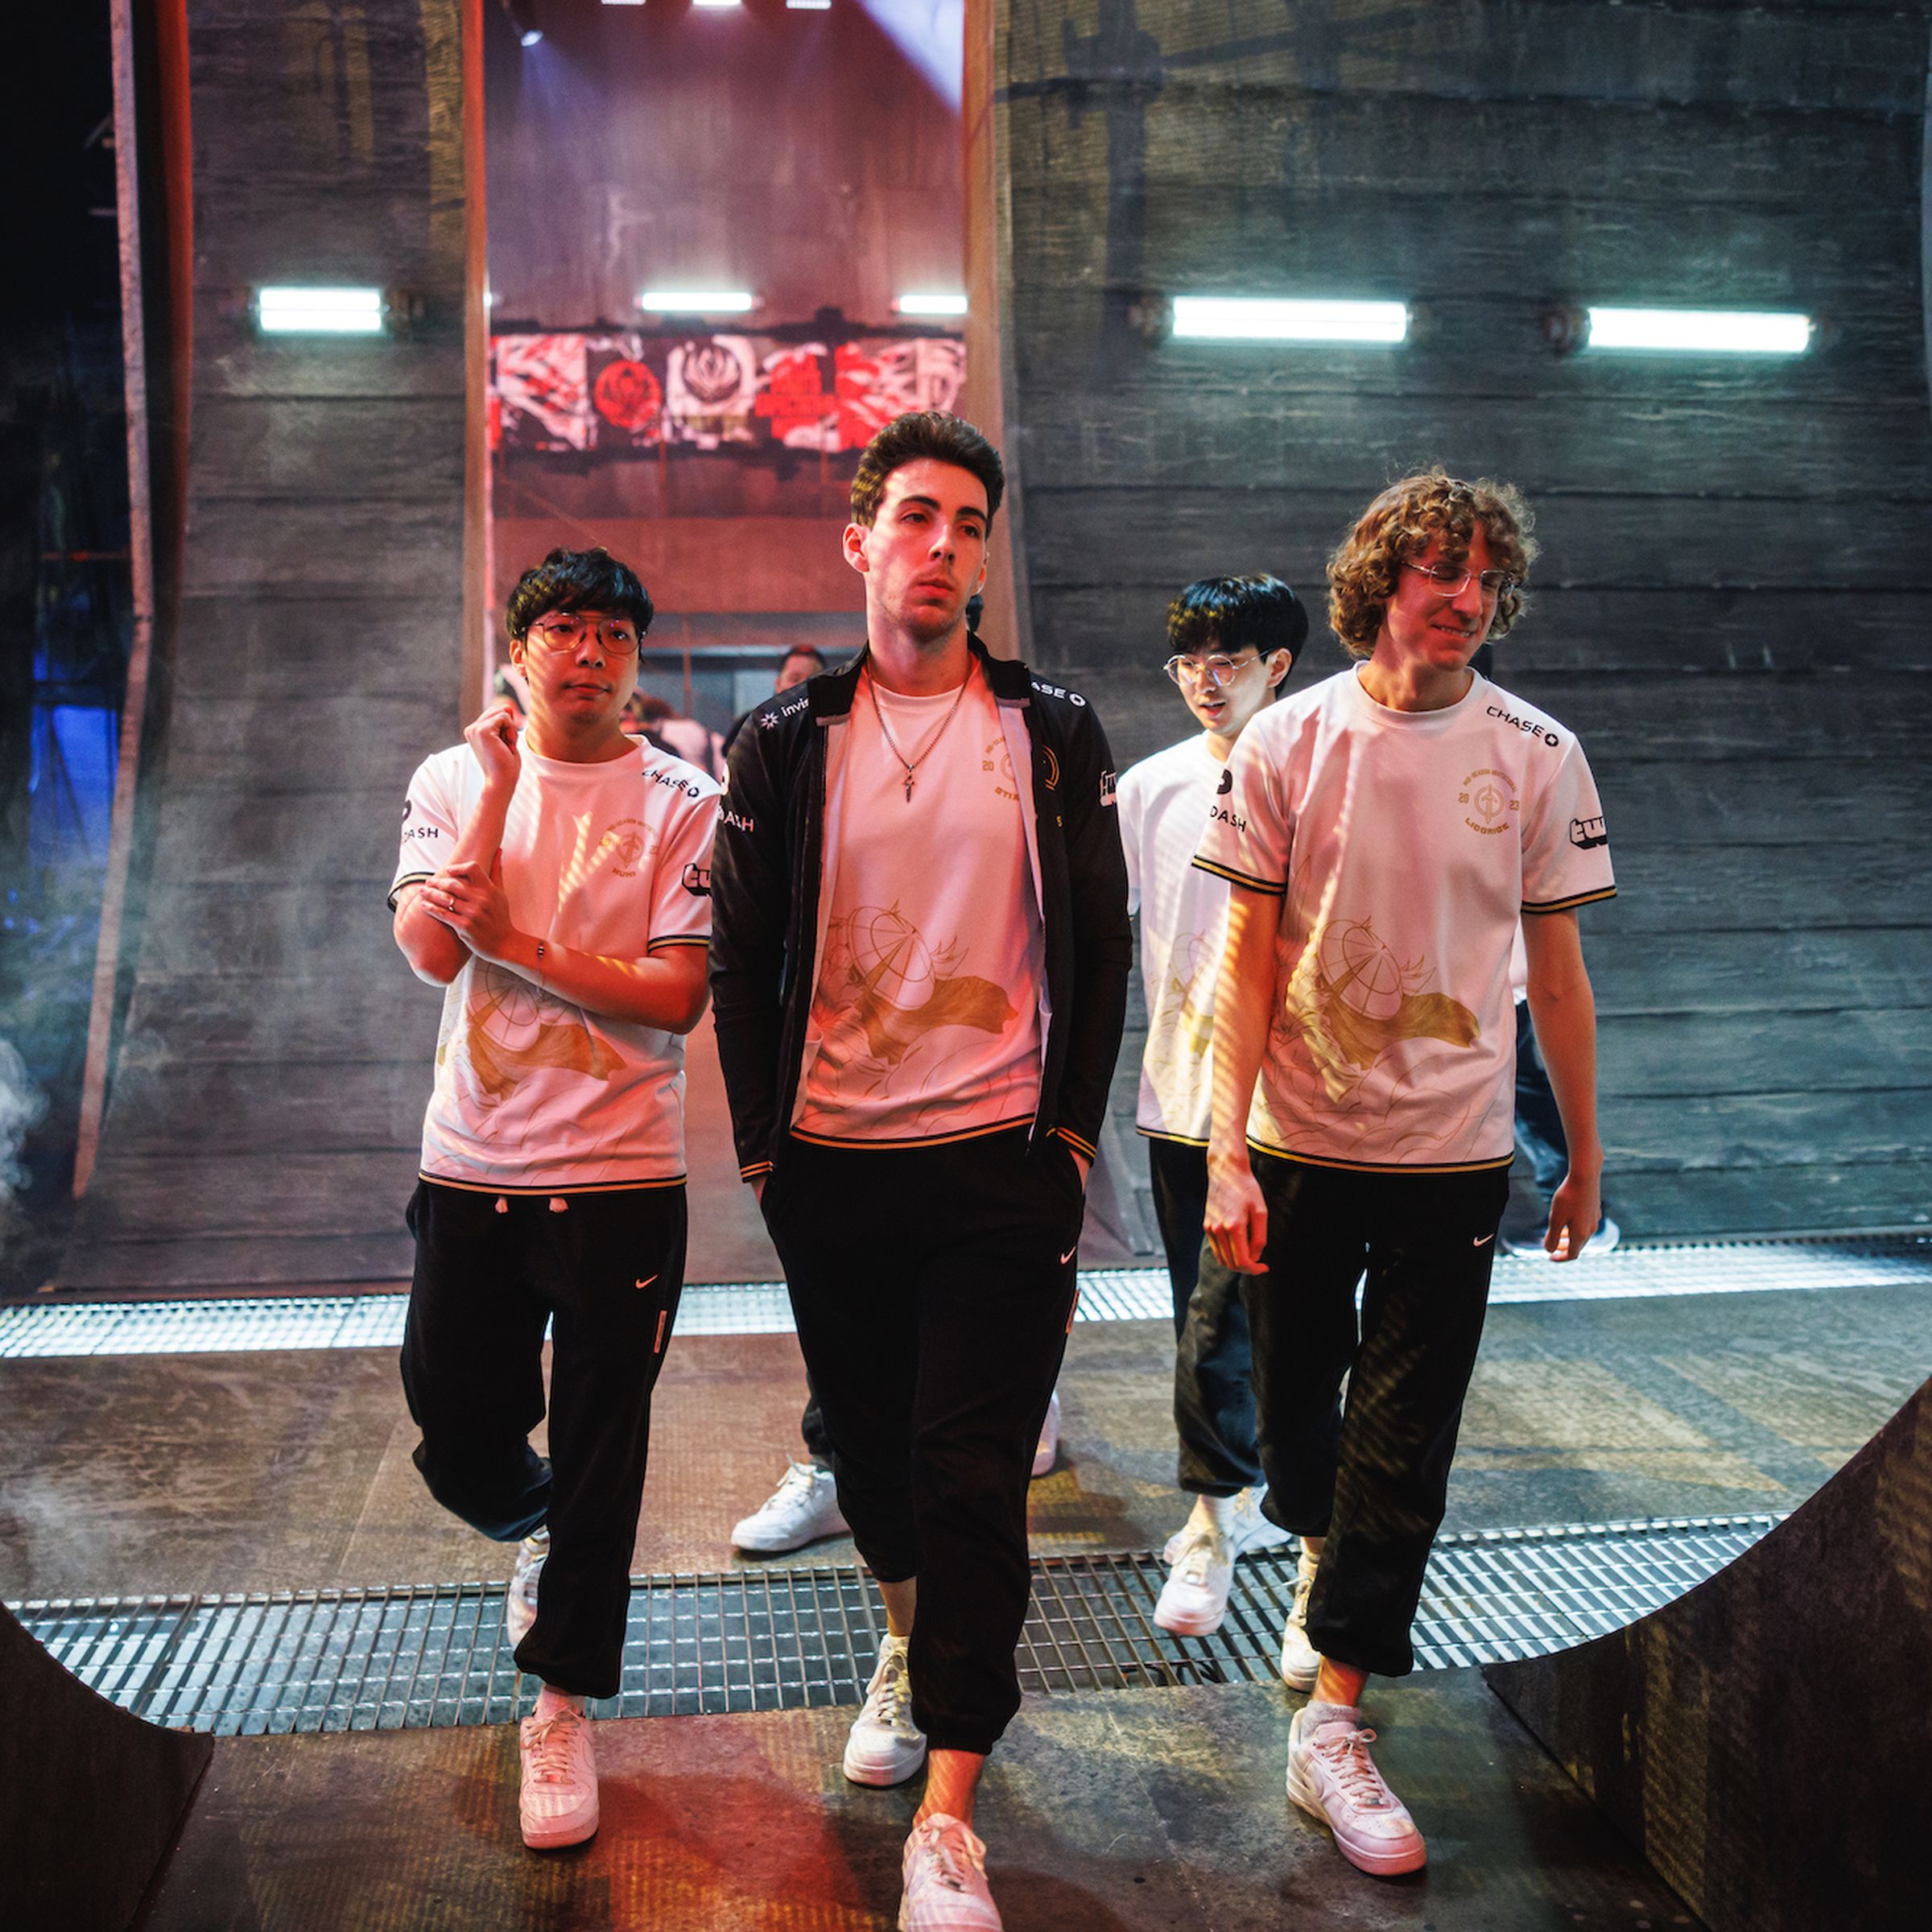 Golden Guardians walk offstage after elimination by Cloud9 at the League of Legends - Mid-Season Invitational Bracket Stage.